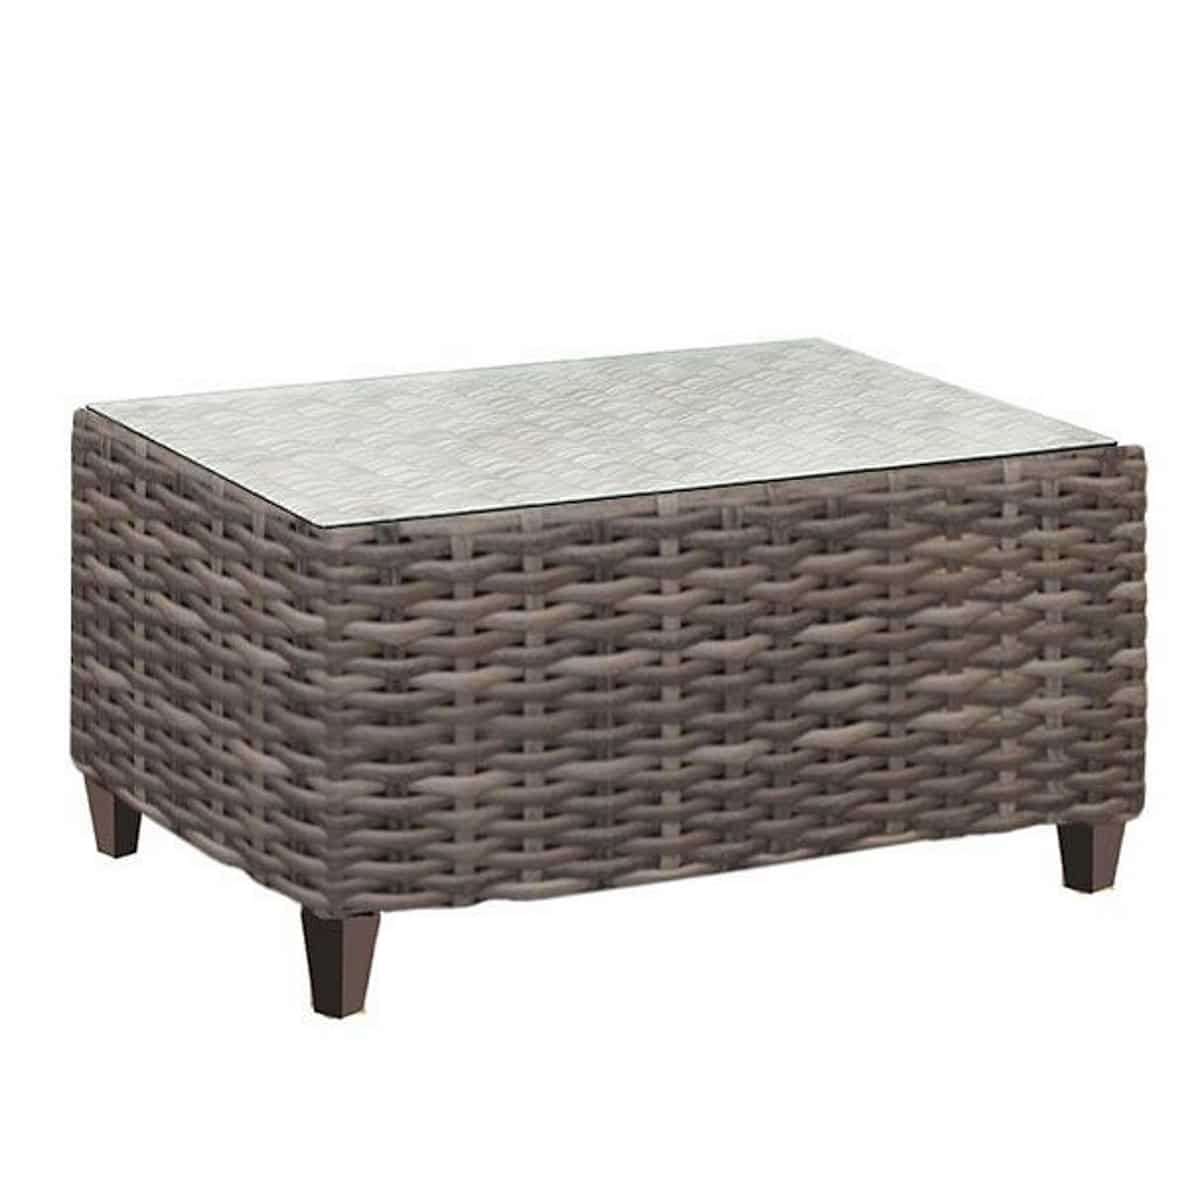 Forever Patio Aberdeen Wicker Coffee Table Includes Glass Top FP-ABE-CT-REC-RYE Table Forever Patio 